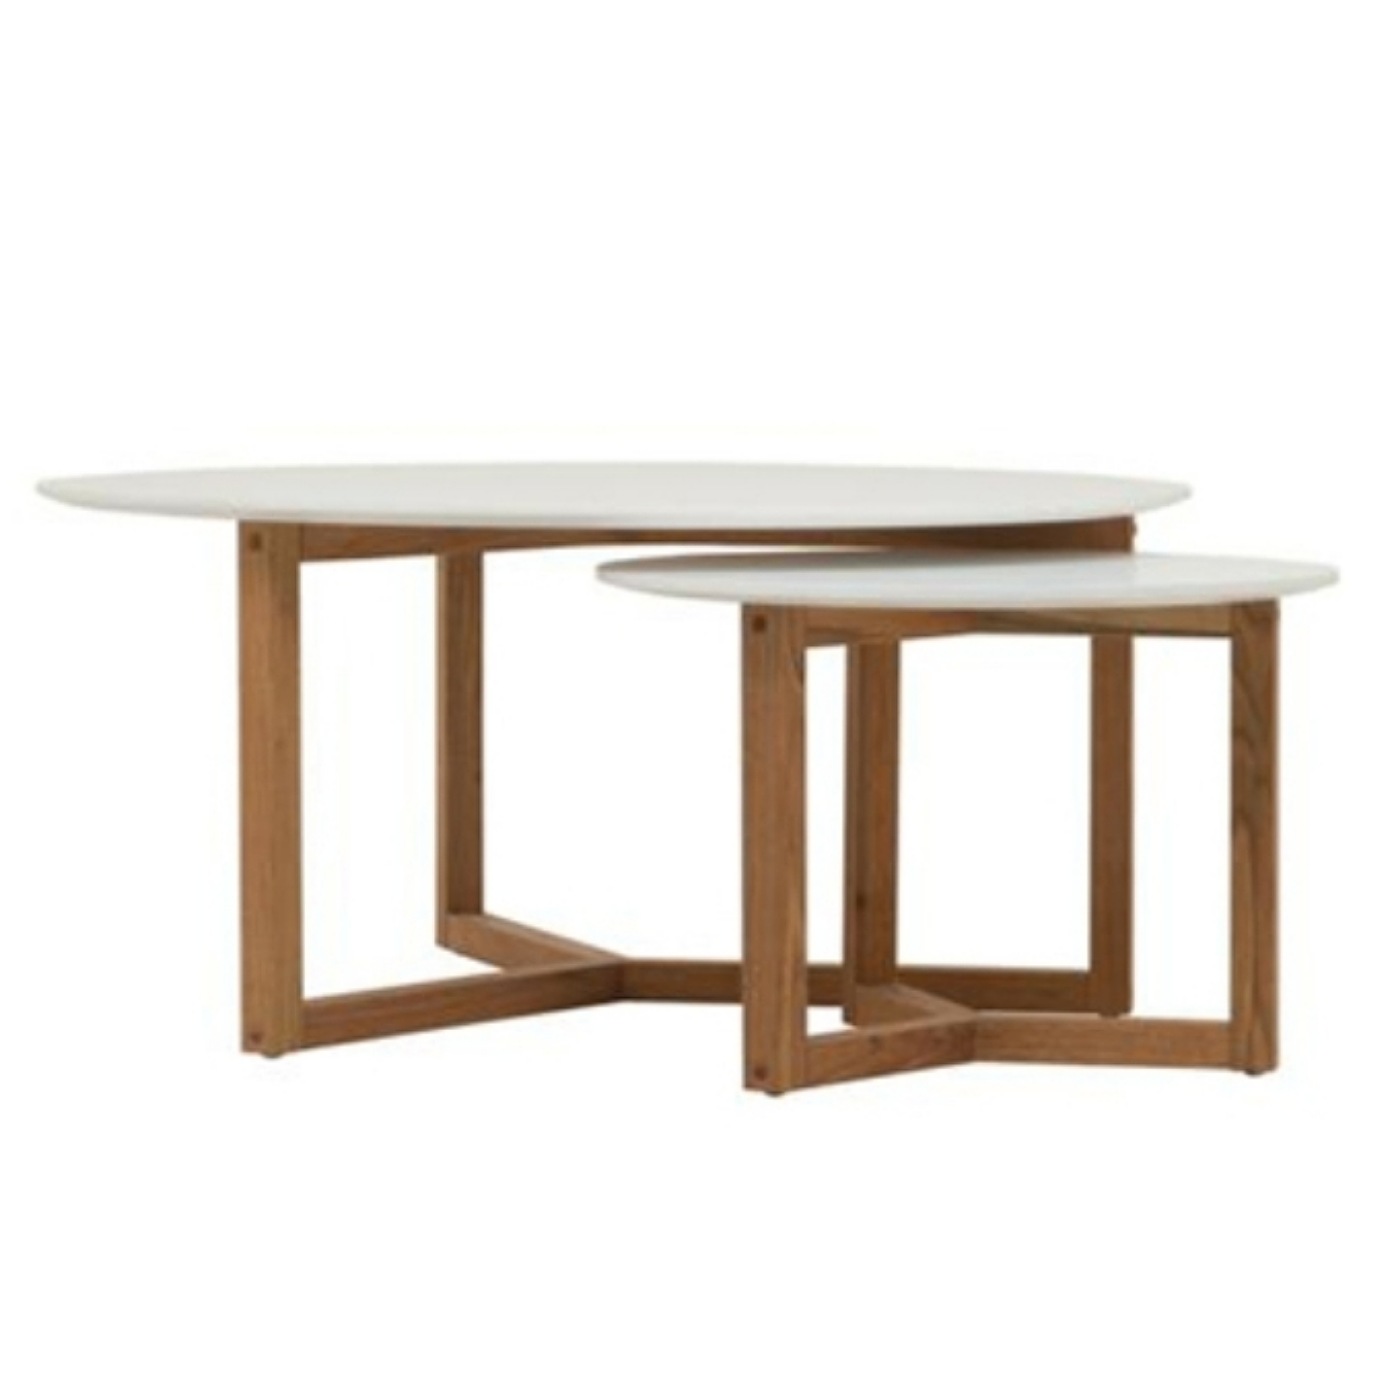 Nesting Table With Wooden Frame And White Round Tops.